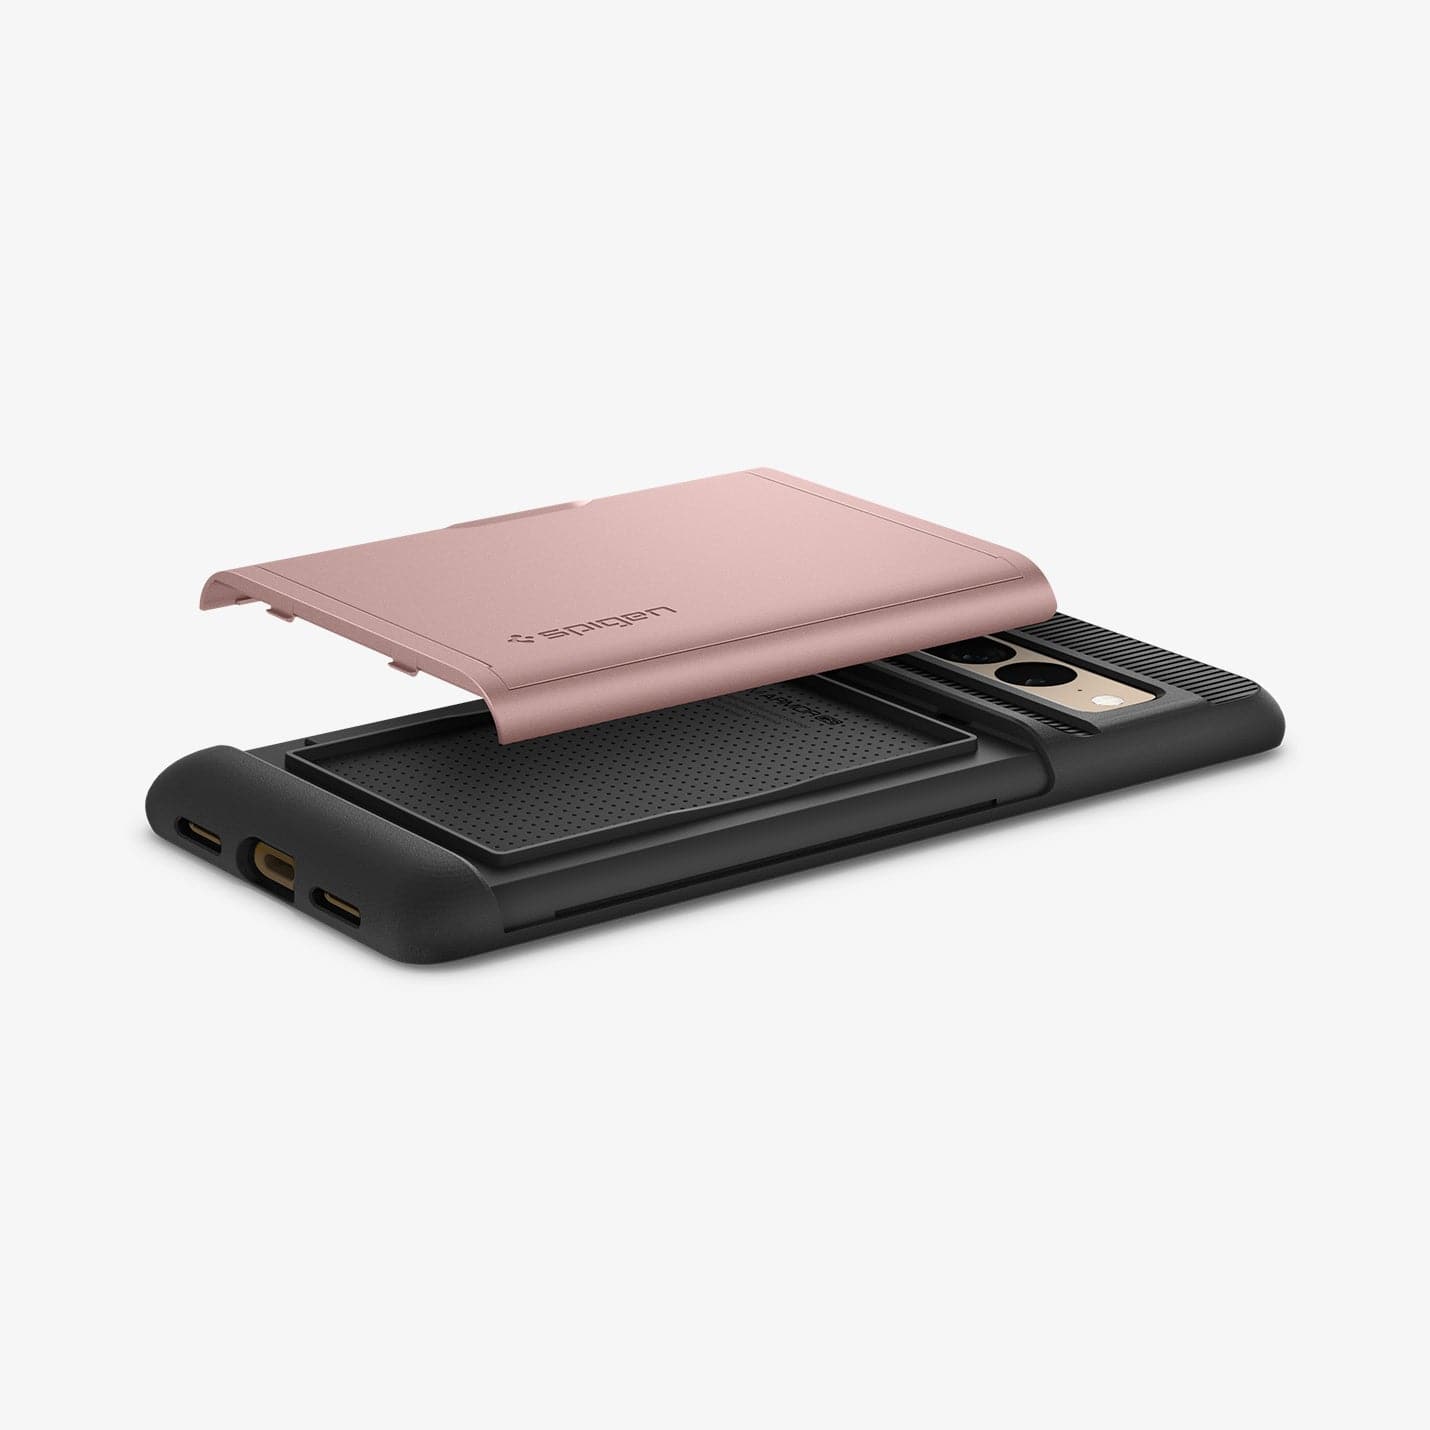 ACS04732 - Pixel 7 Pro Case Slim Armor CS in rose gold showing the back card slot cover hovering above case